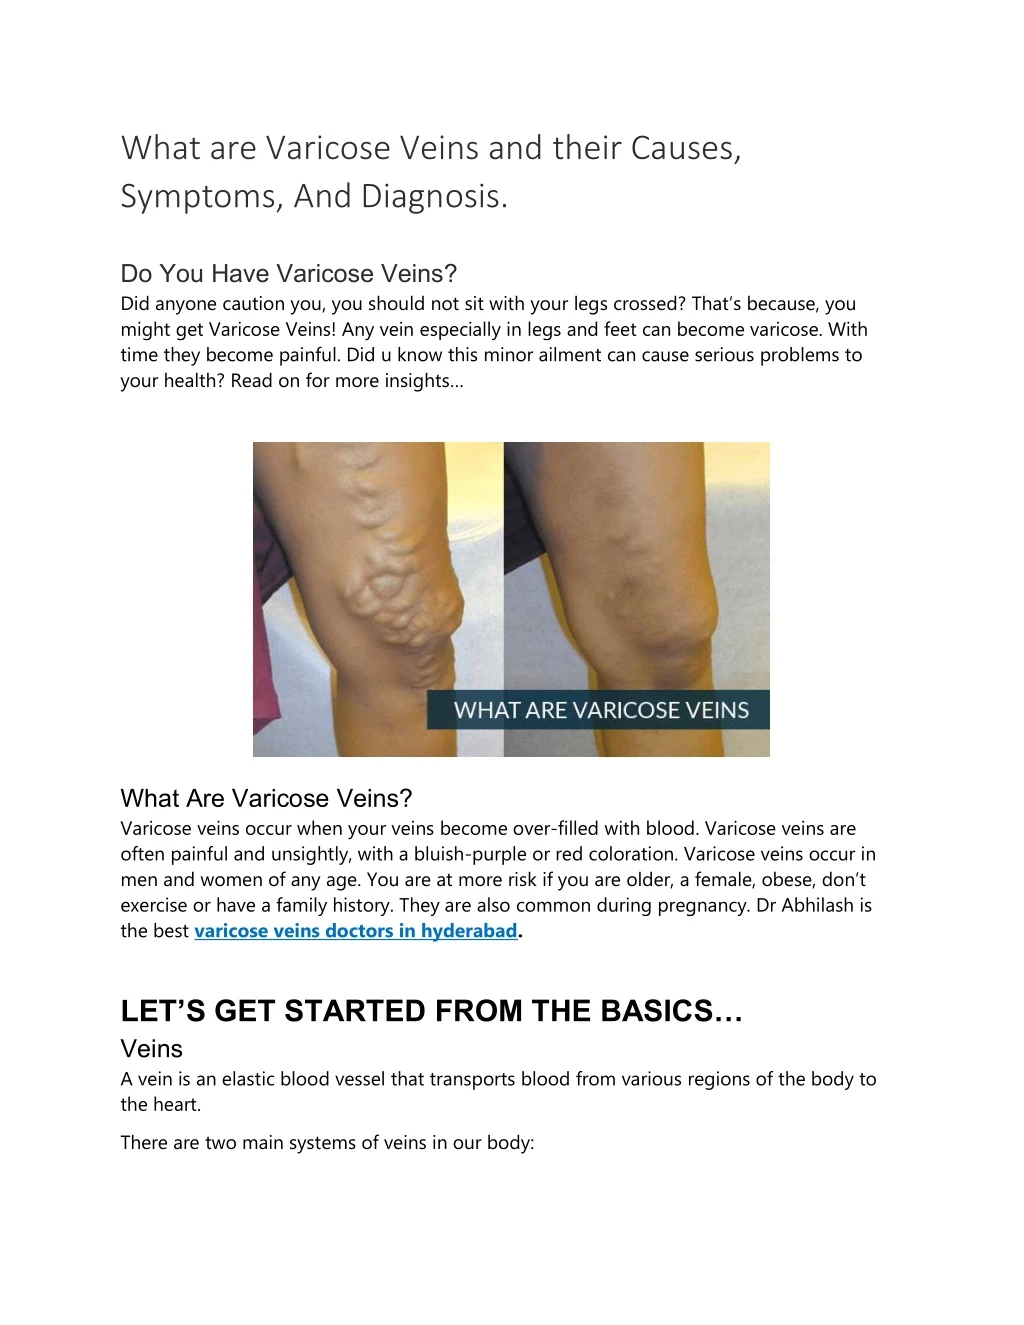 what are varicose veins and their causes symptoms